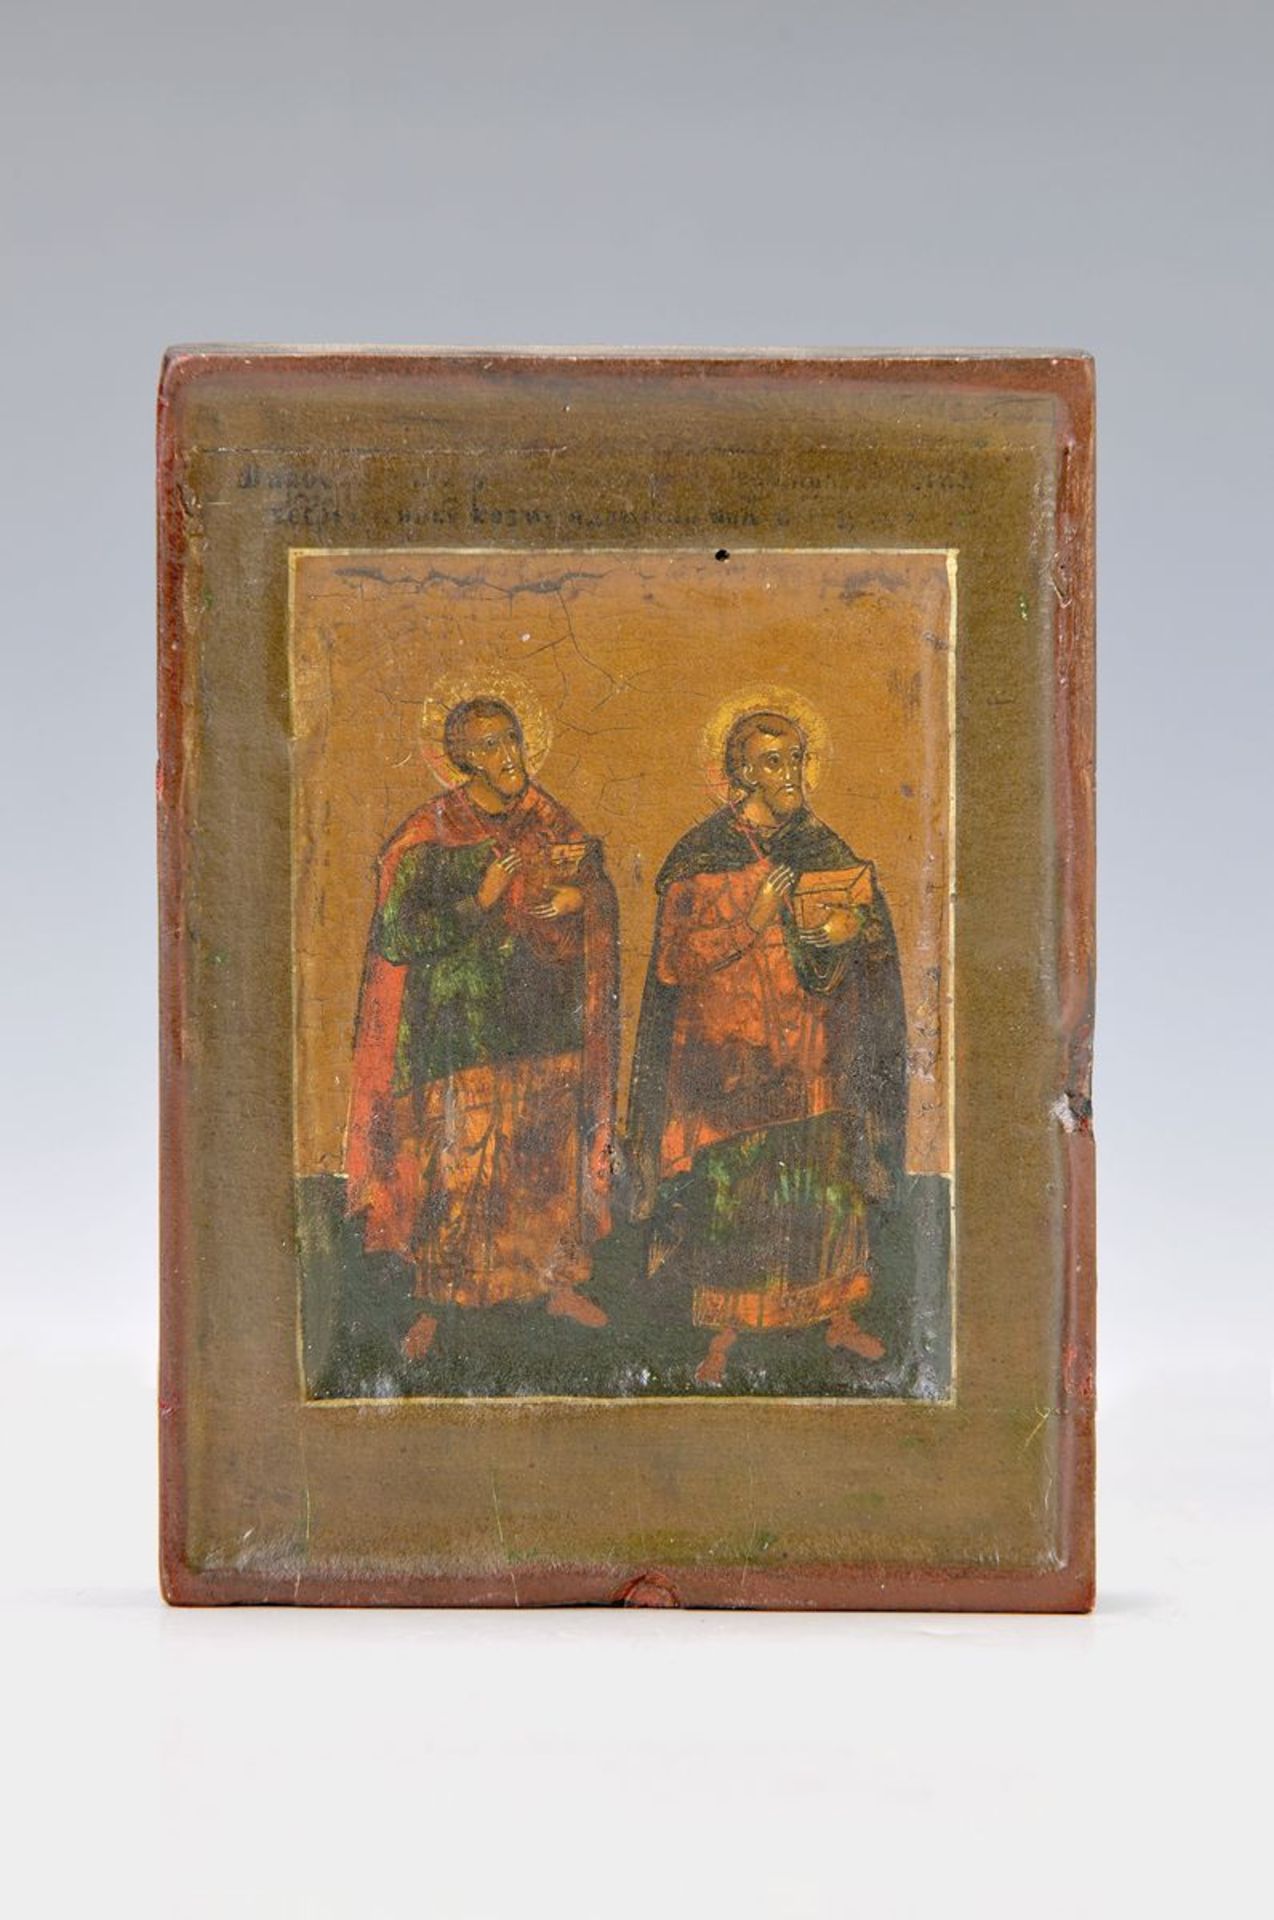 Icon, Russia, around 1840, Kosmos and Damian, approx. 13 x 9 cm, egg tempera/wood, slightly rest.